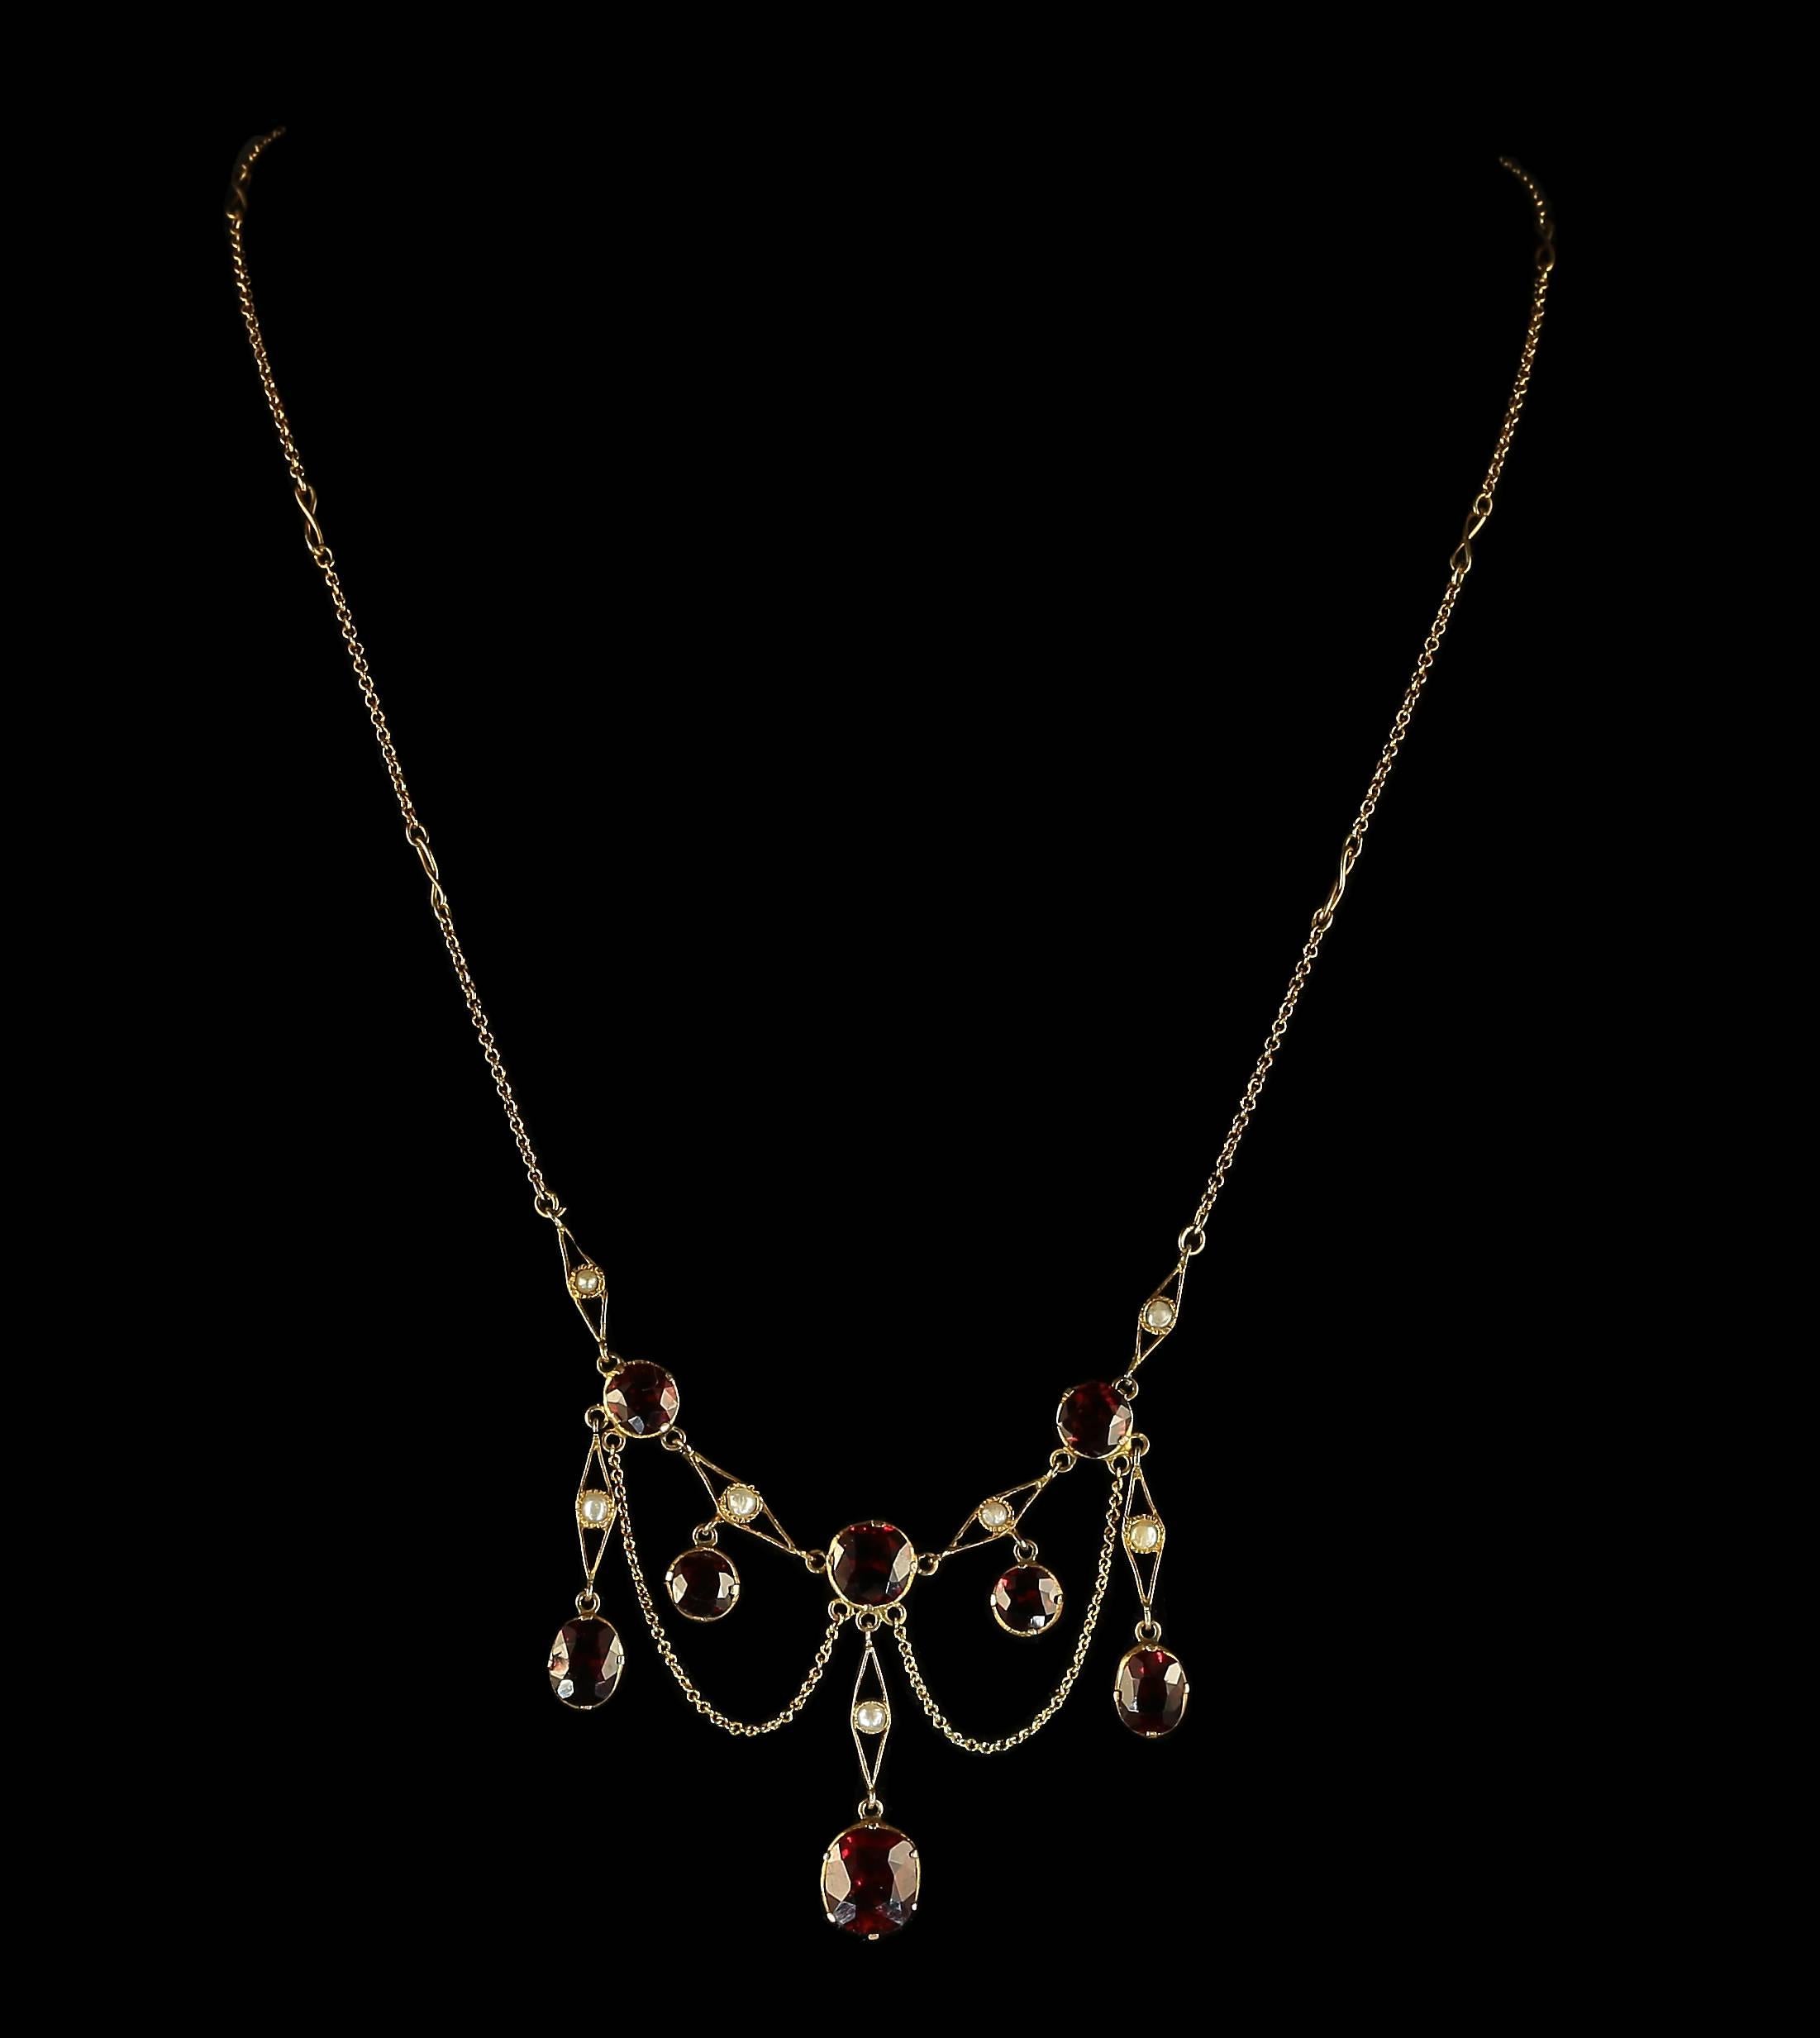 This fabulous 18ct yellow gold necklace is adorned with beautiful rich deep garnets and pearls.

The bottom garnet is 4ct alone, with swags of gold making a fabulous garland of garnets and pearls.

The necklace is fancy with lovely S panels around